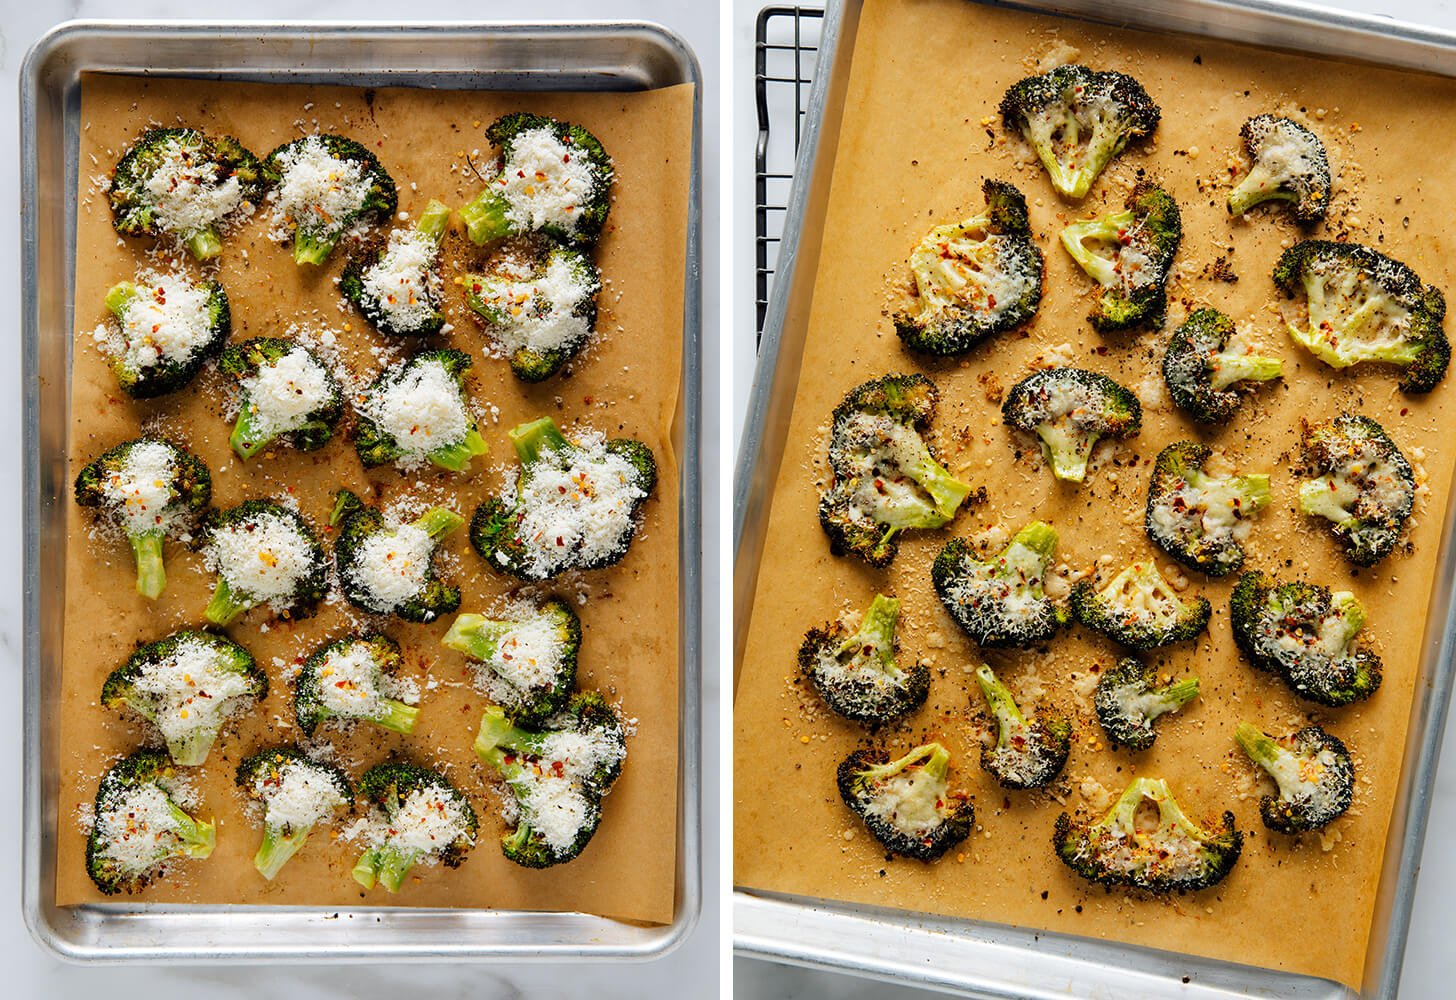 smashed broccoli before and after baking